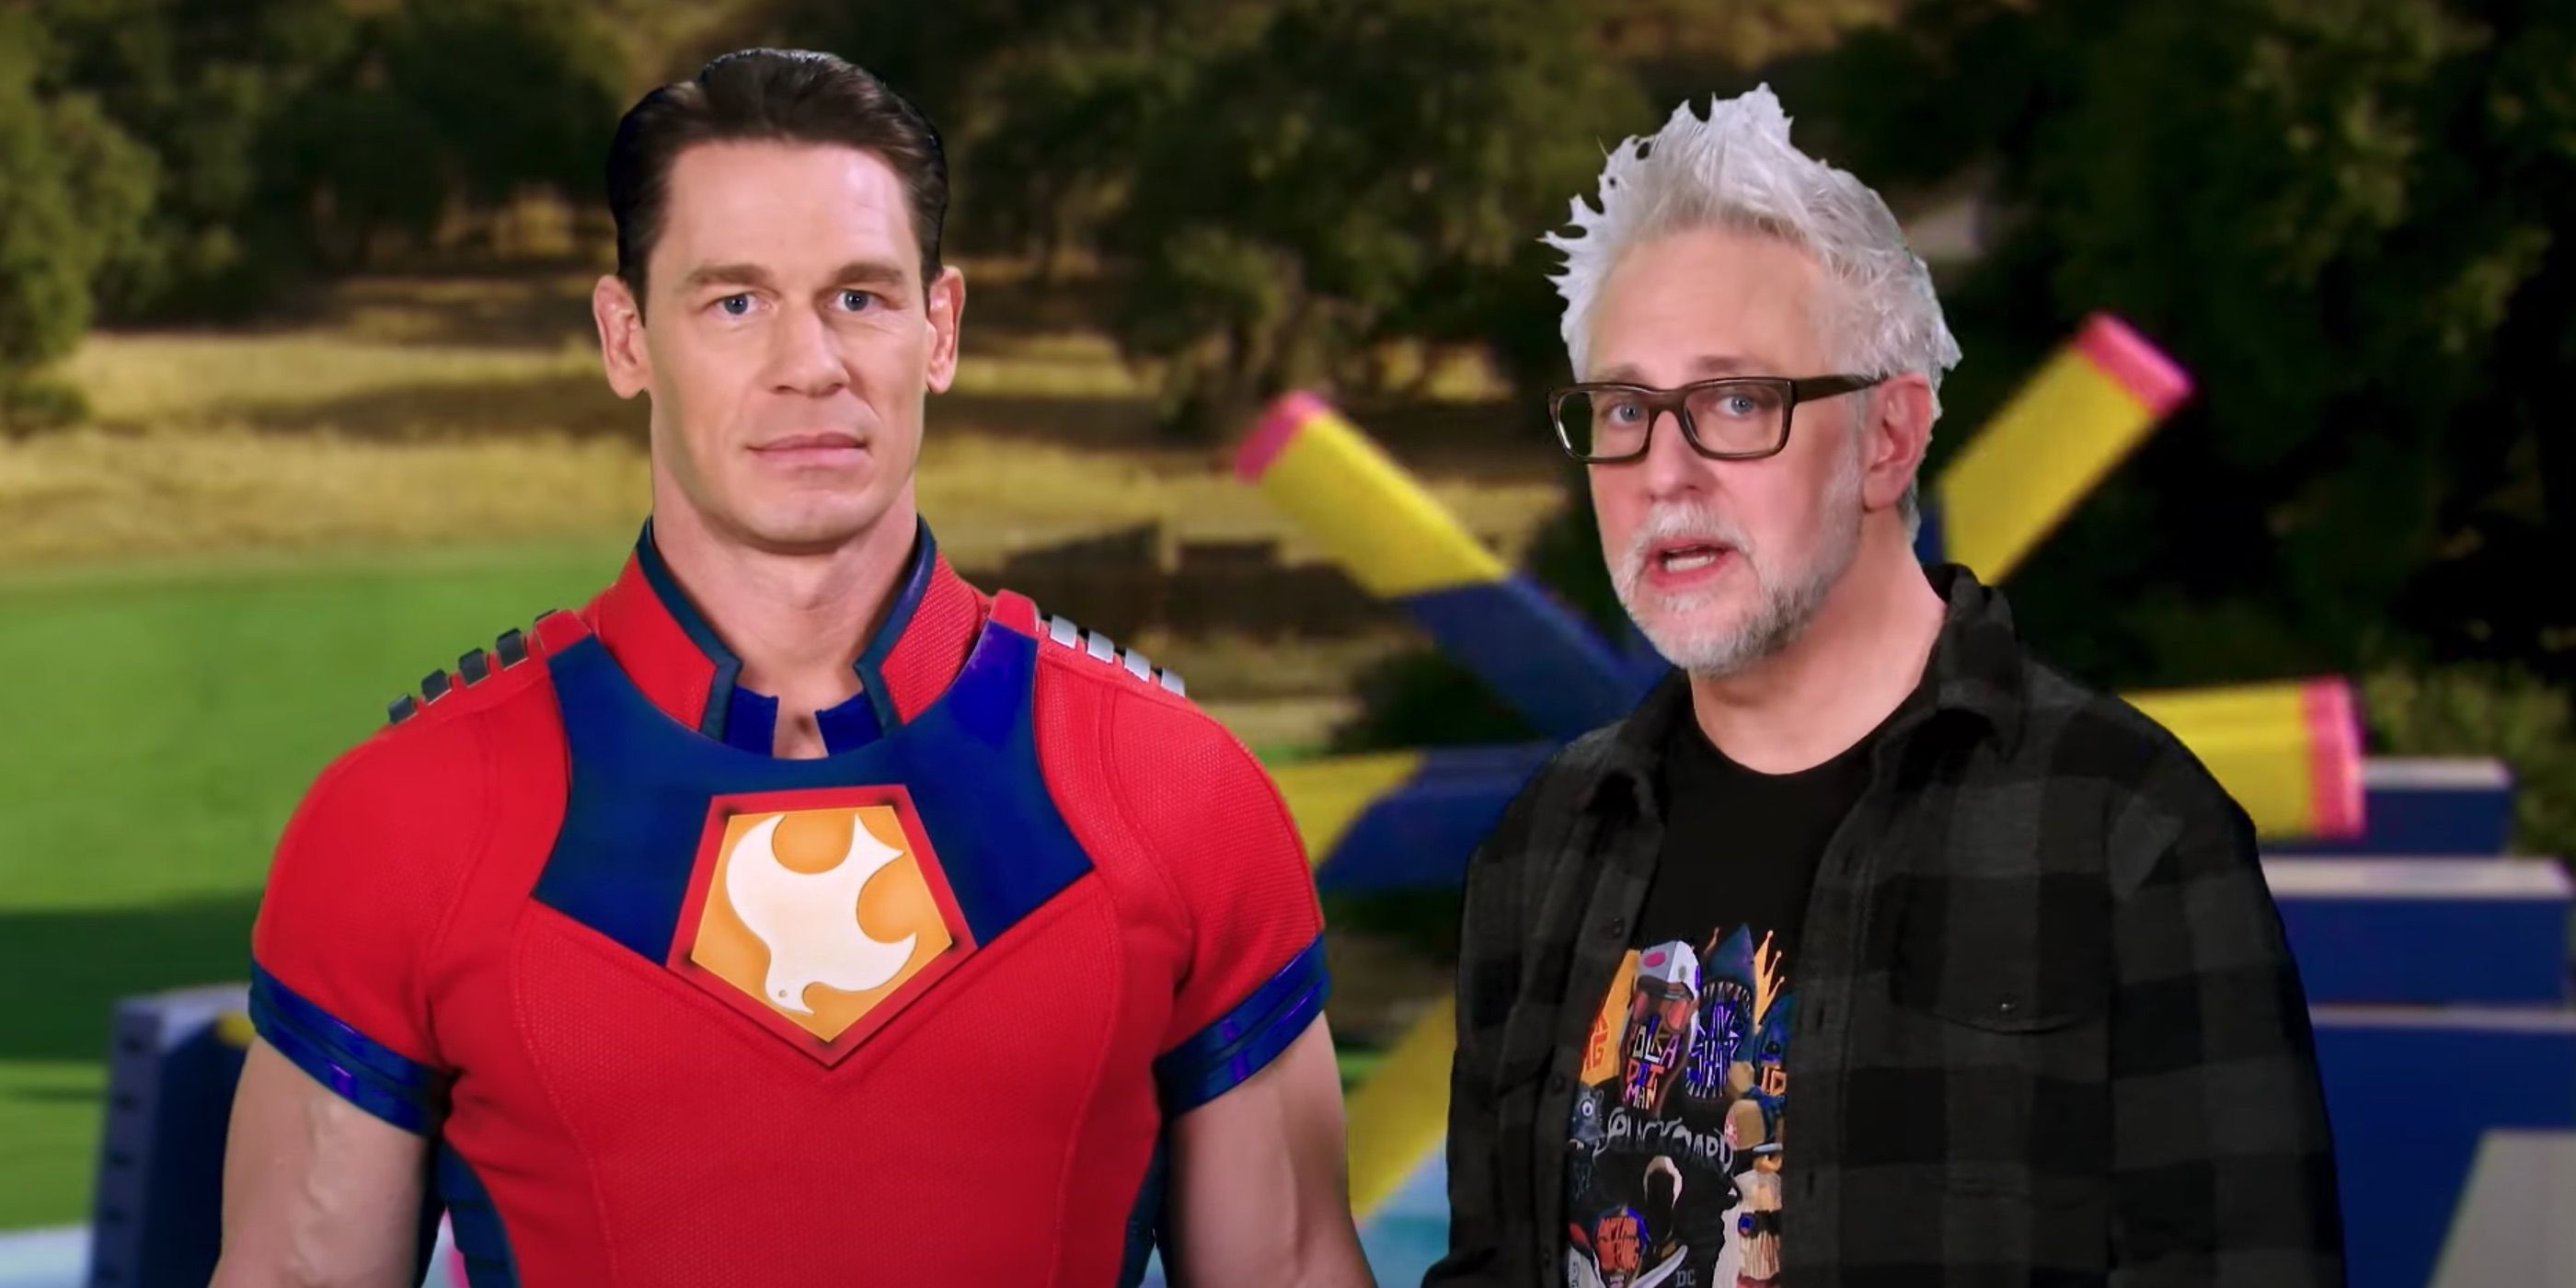 wipeout-suicide-squad-special-john-cena-james-gunn-social-featured